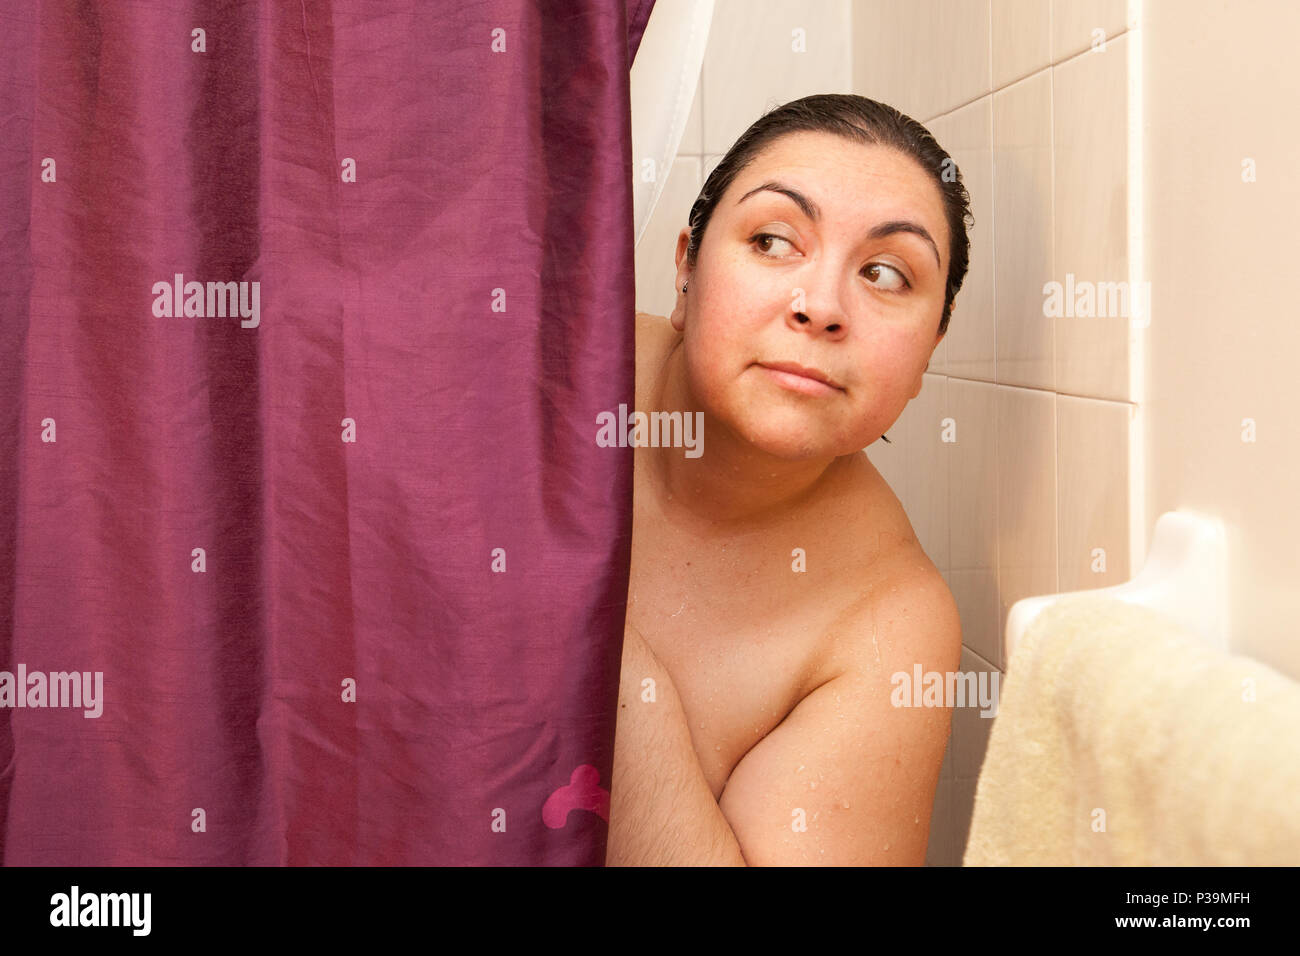 Woman peeks out behind shower curtain curiously Stock Photo